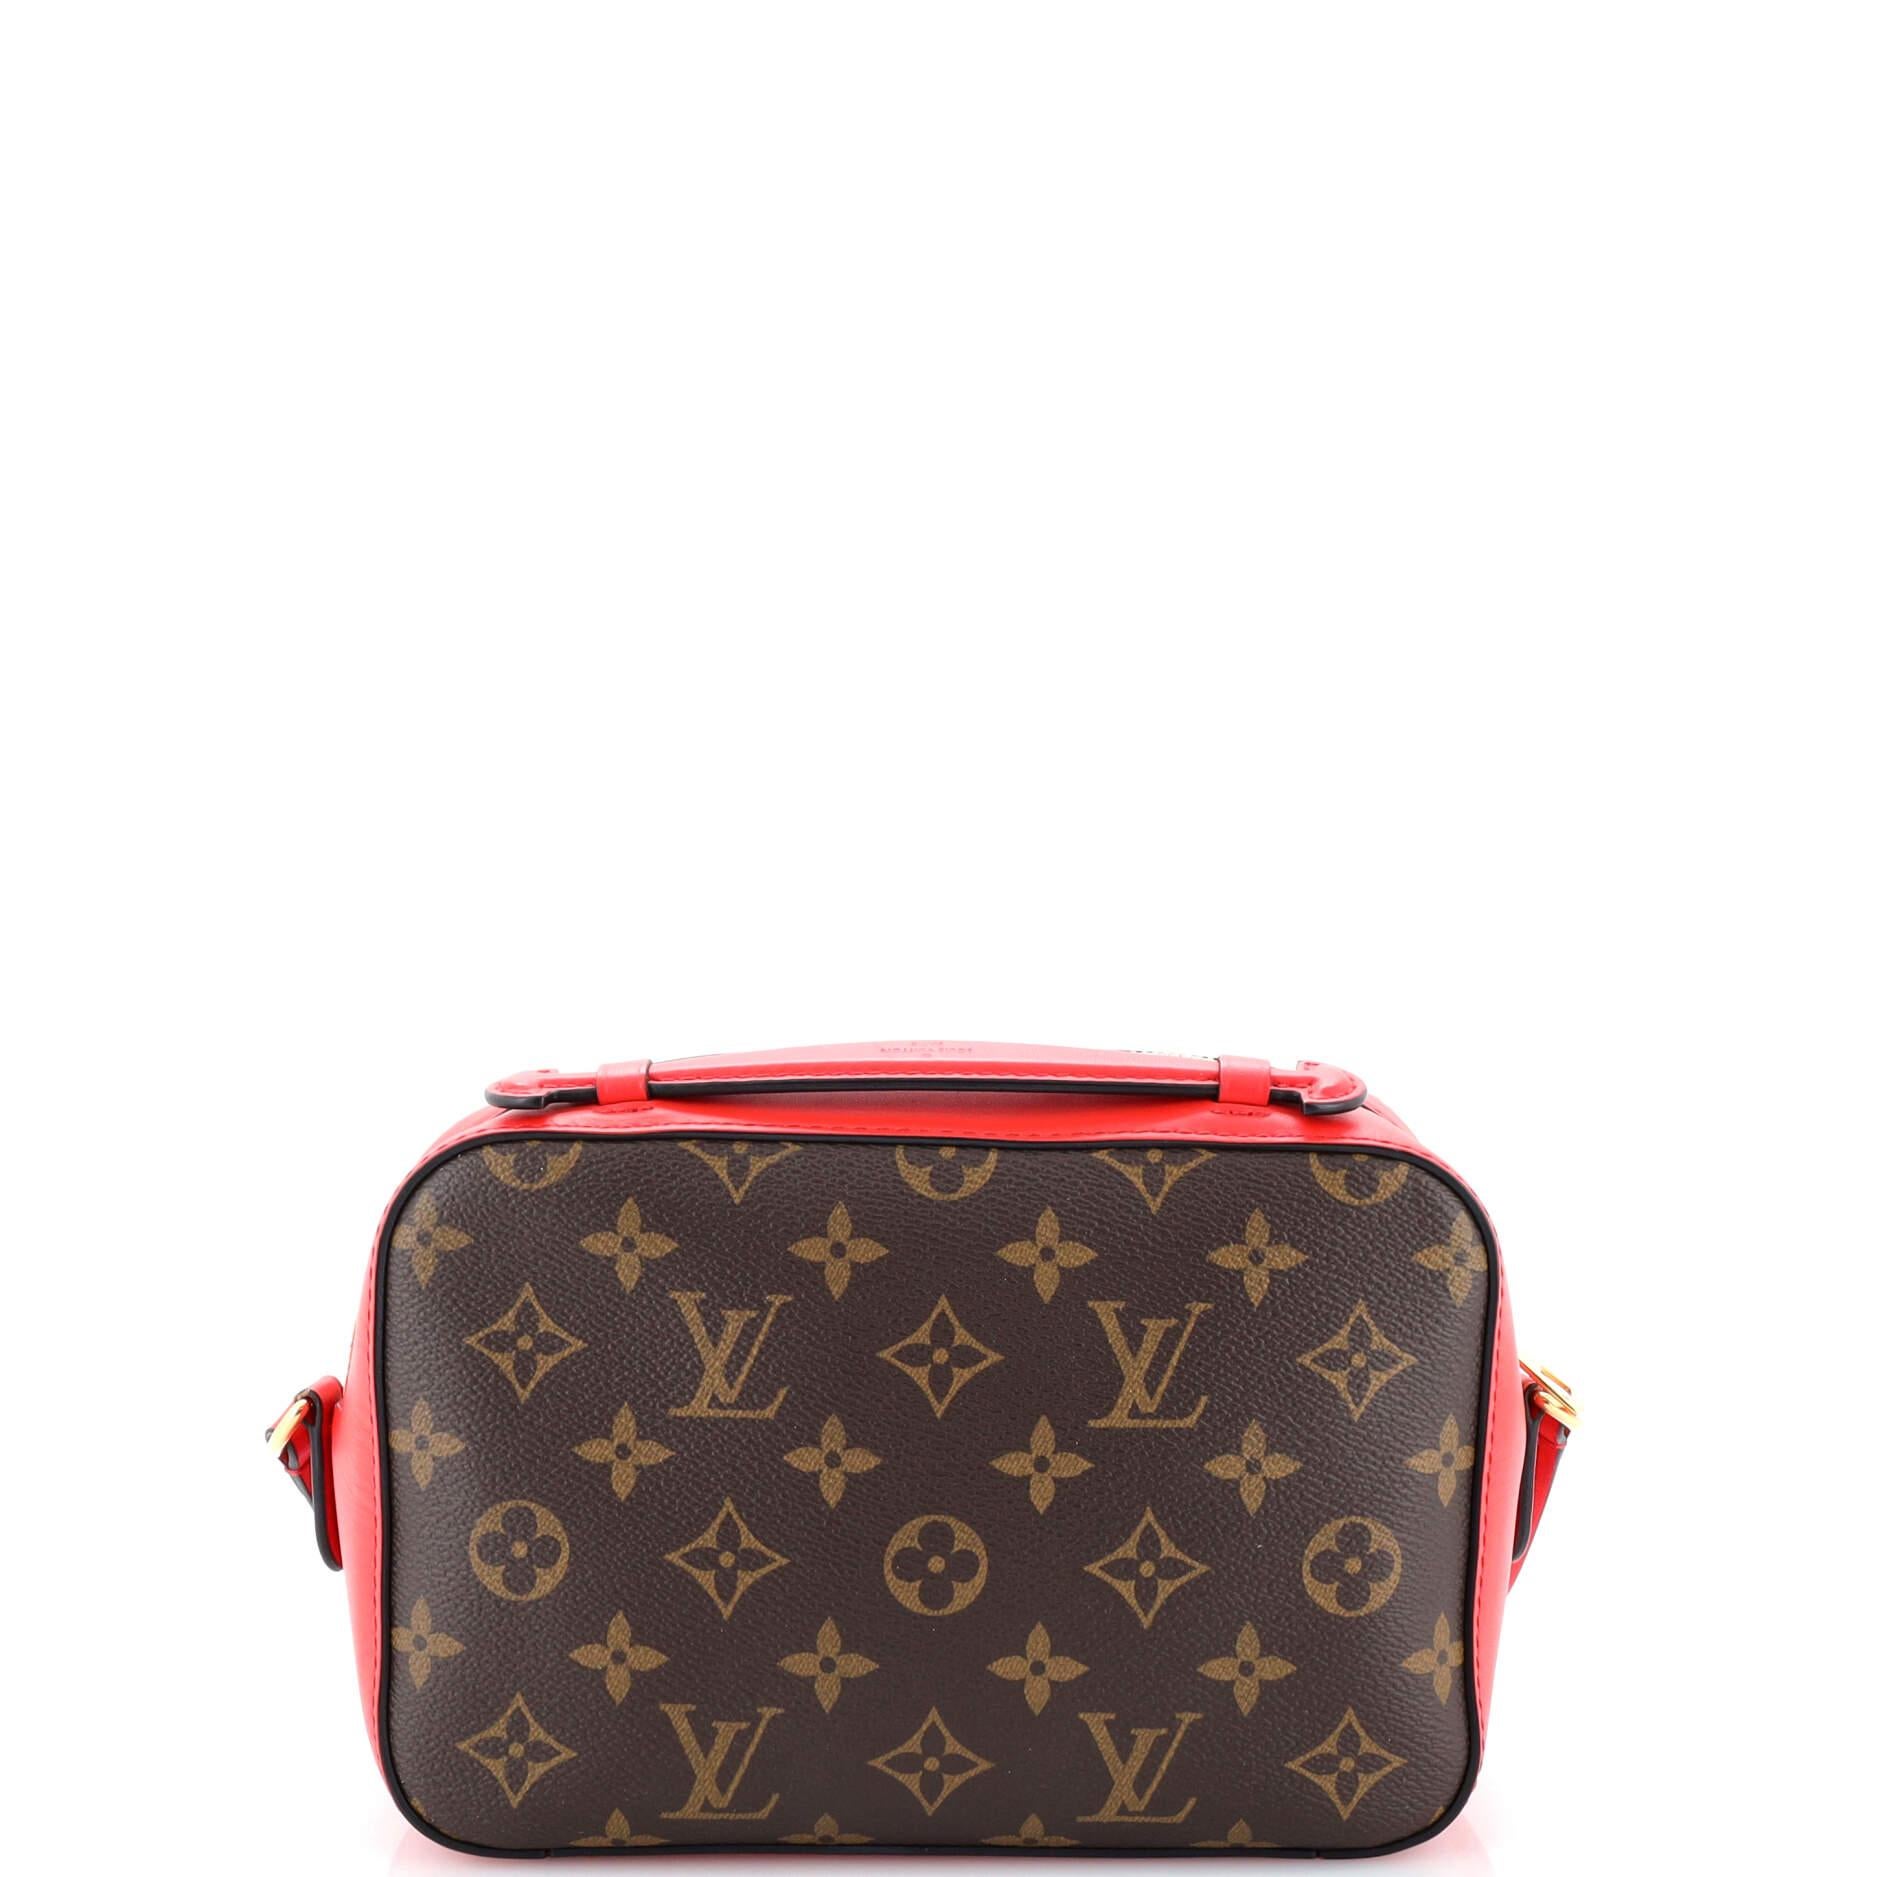 Louis Vuitton Saintonge Handbag Monogram Canvas with Leather In Good Condition For Sale In NY, NY